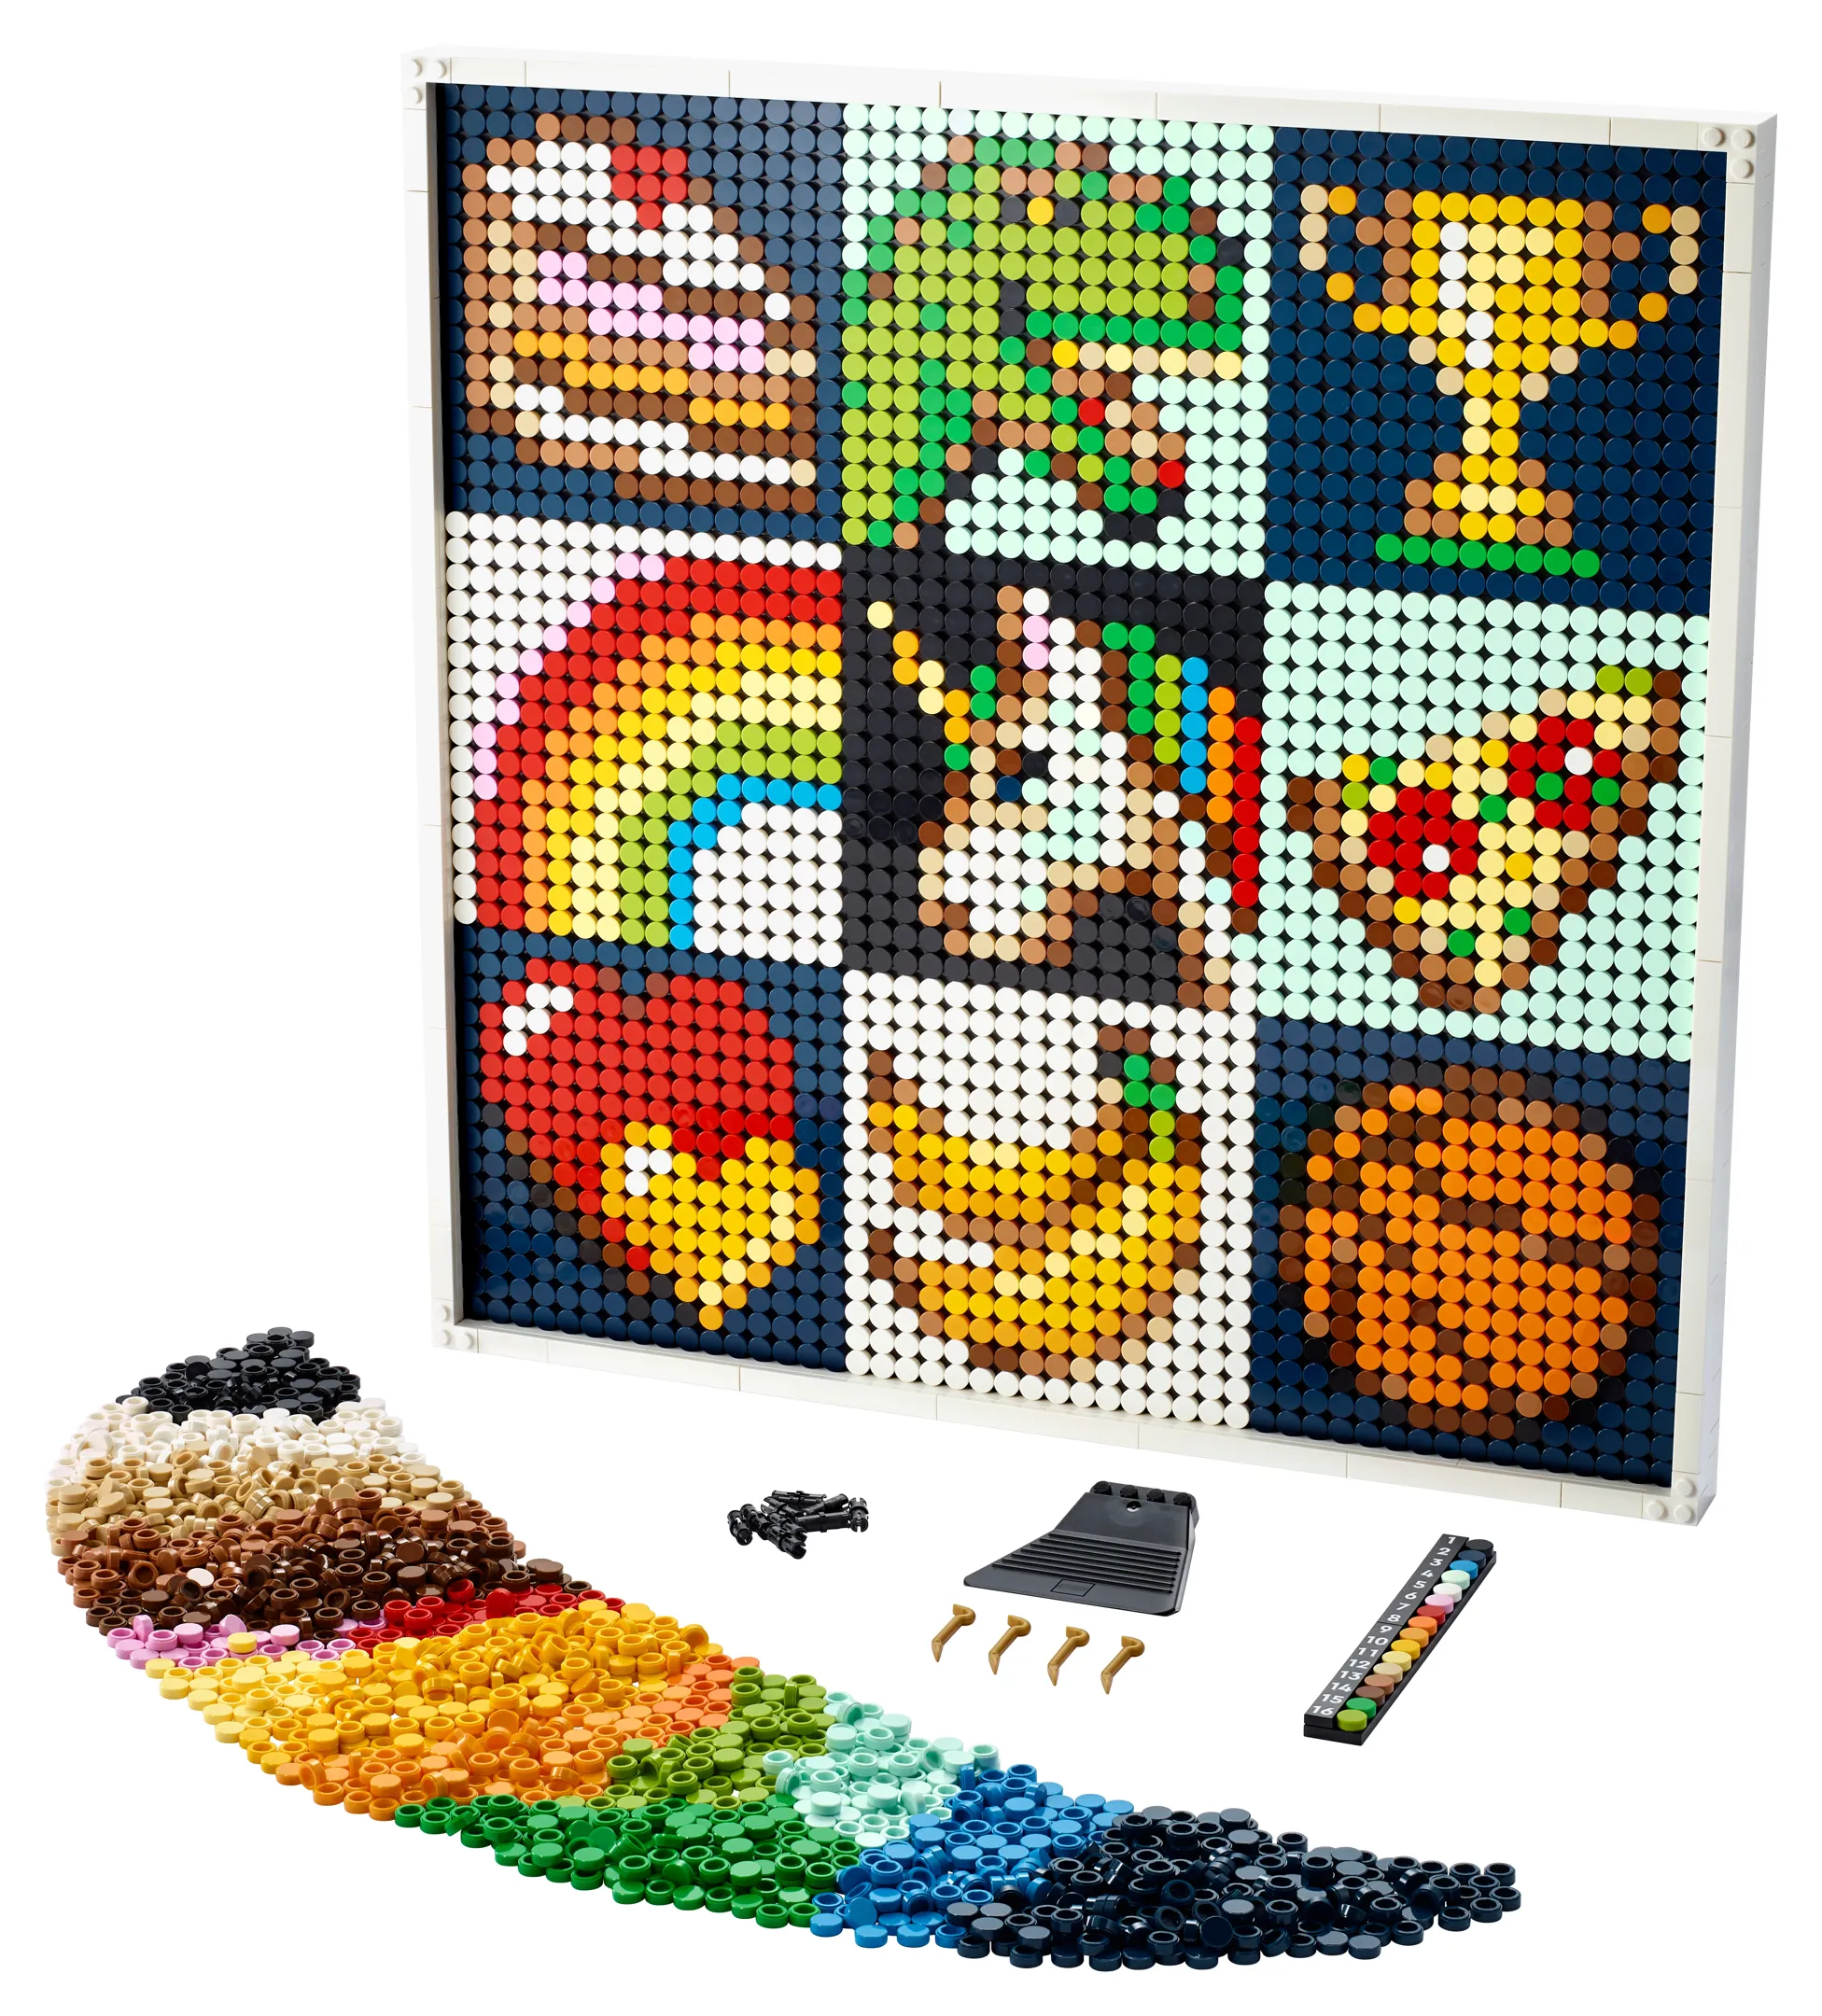 Pin by Lynette Human on Lego  Lego creative, Lego projects, Lego craft